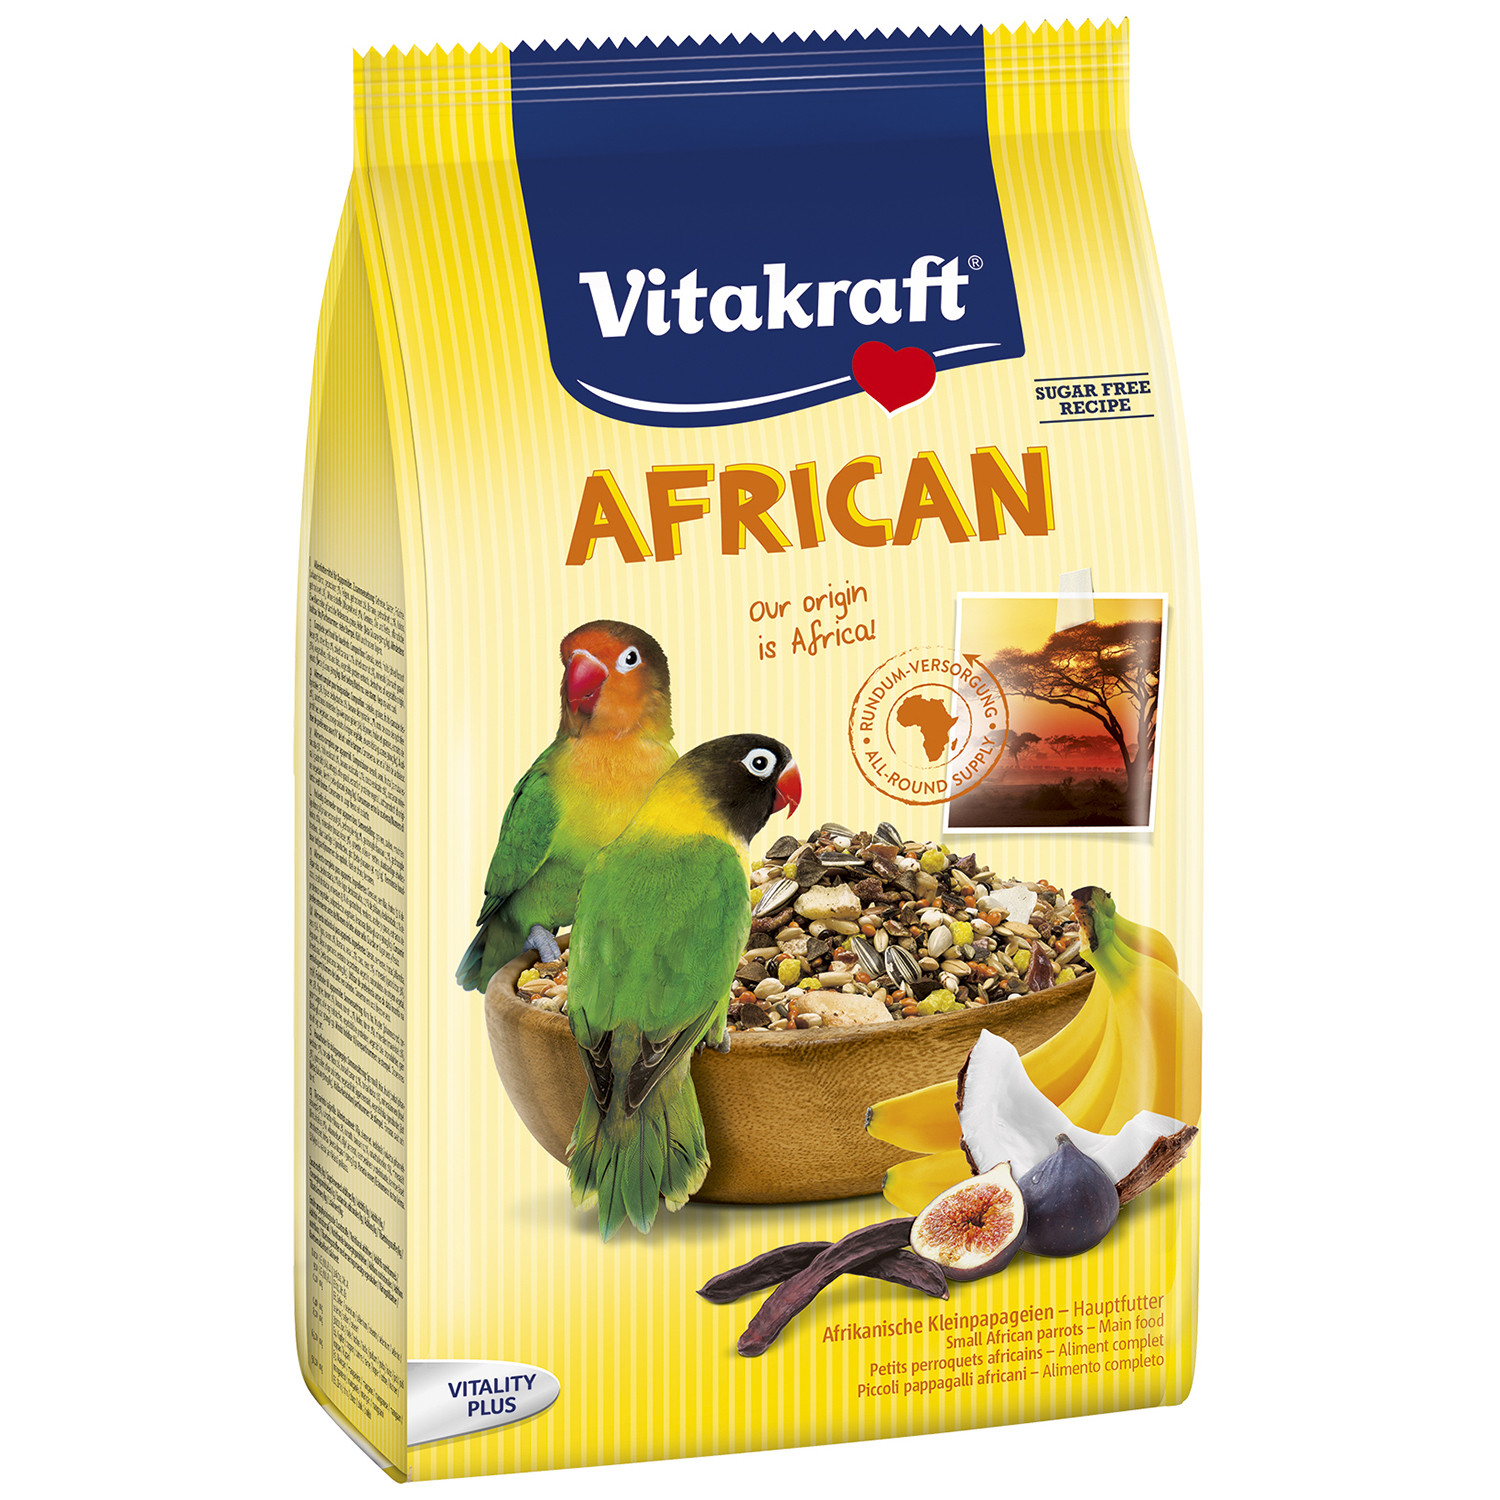 Vitakraft African Parrot Food - Small Breeds Image